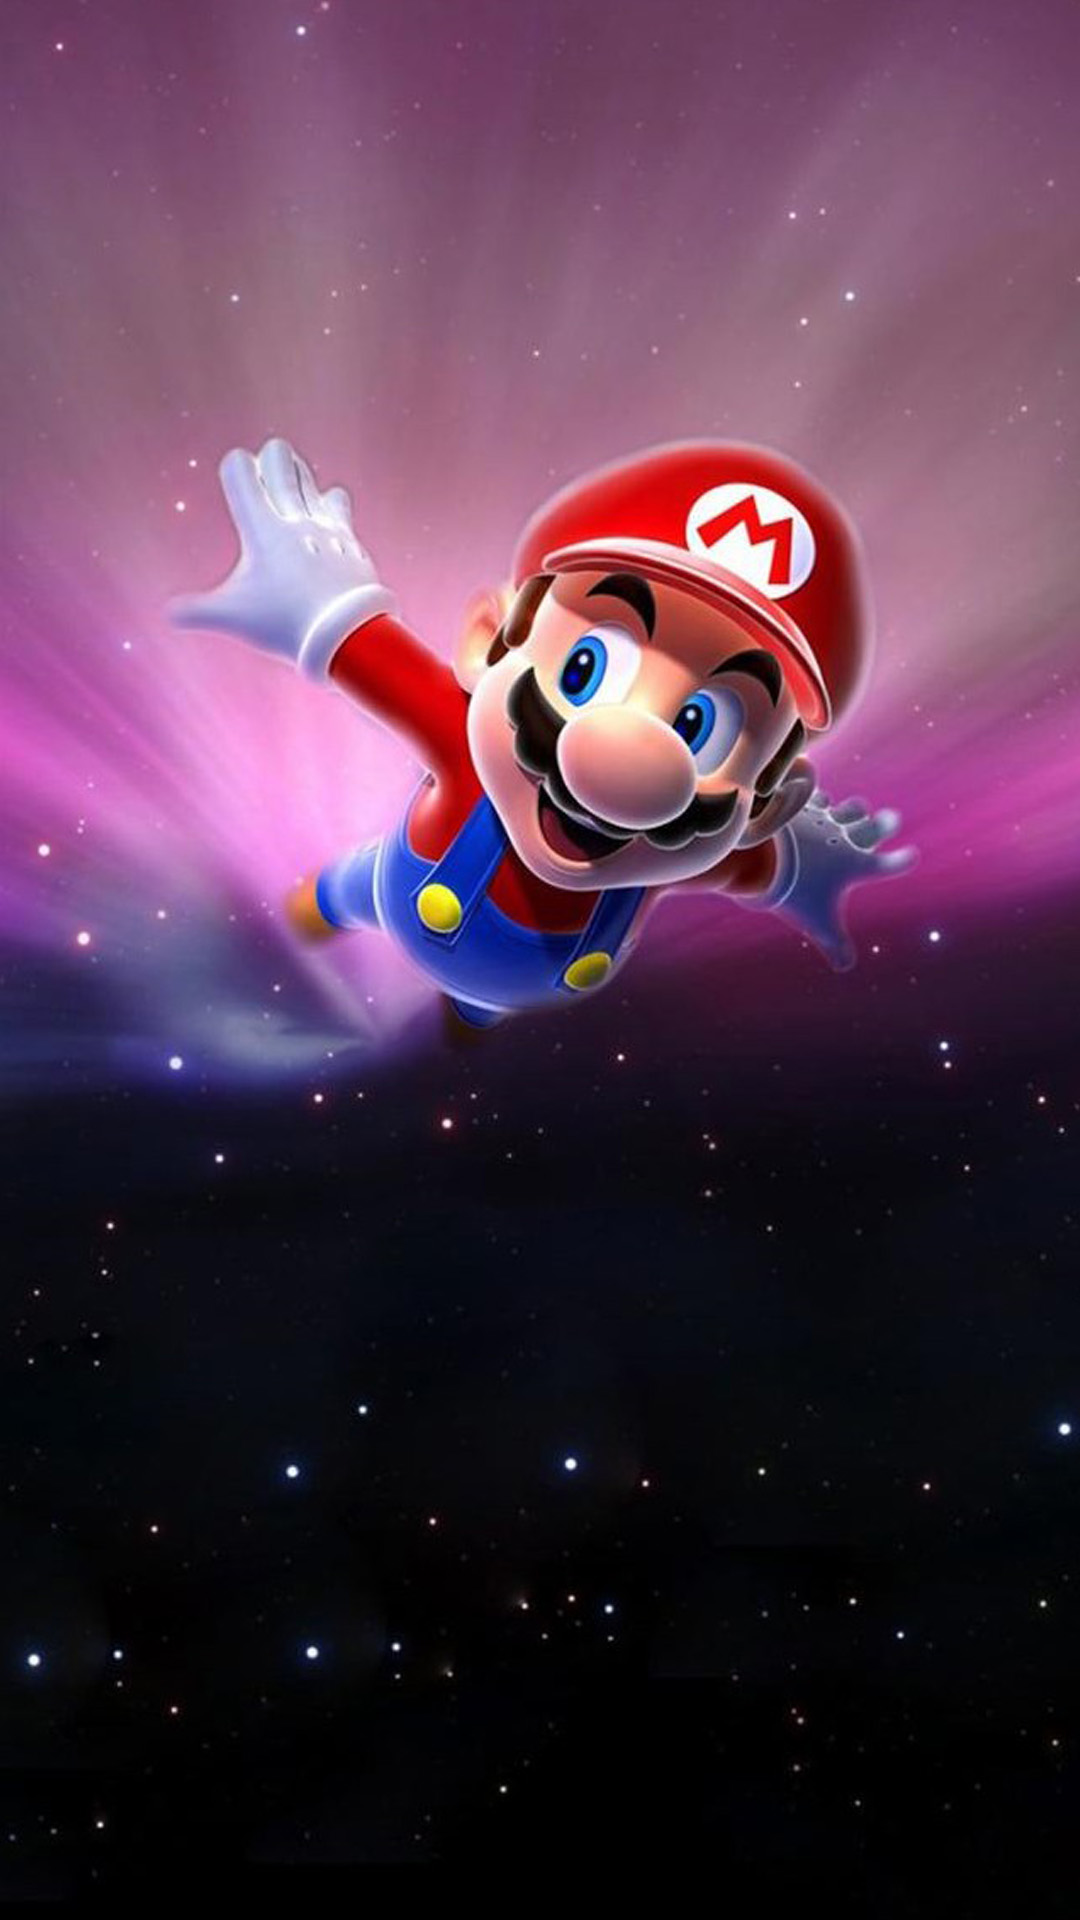 Game Super Mario Galaxy Iphone6s Wallpaper Iphone Wallpapers